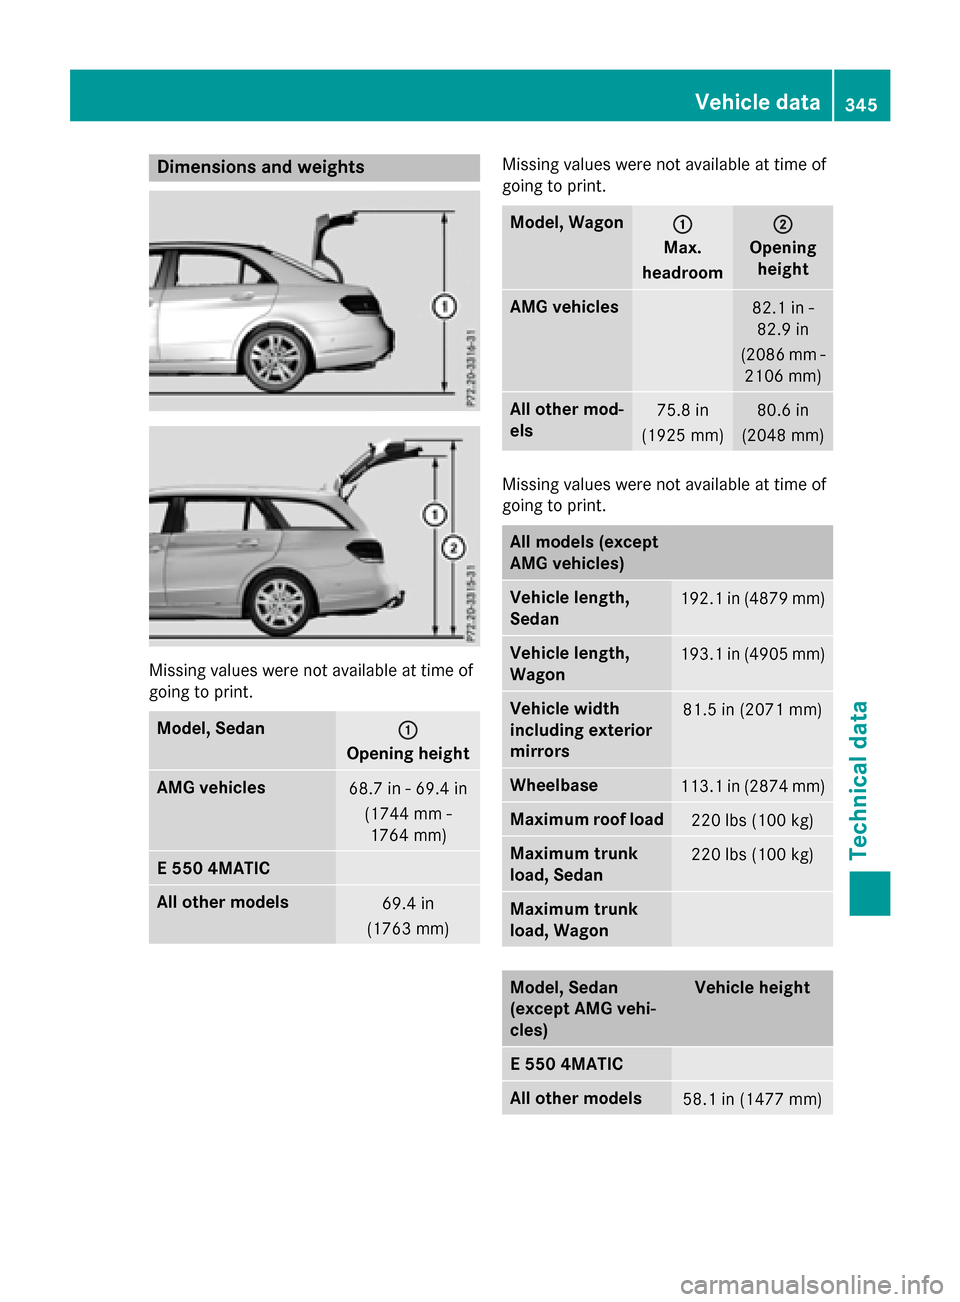 MERCEDES-BENZ E-Class WAGON 2016 W213 Owners Manual Dimensions andweights
Missin gvalues wer eno tavailable at time of
going to print .
Model, Sedan:
Openingheight
AMG vehicles68.7 in -69.4 in
(1744 mm -
1764 mm)
E 550 4MATIC
All other model s69.4 in
(